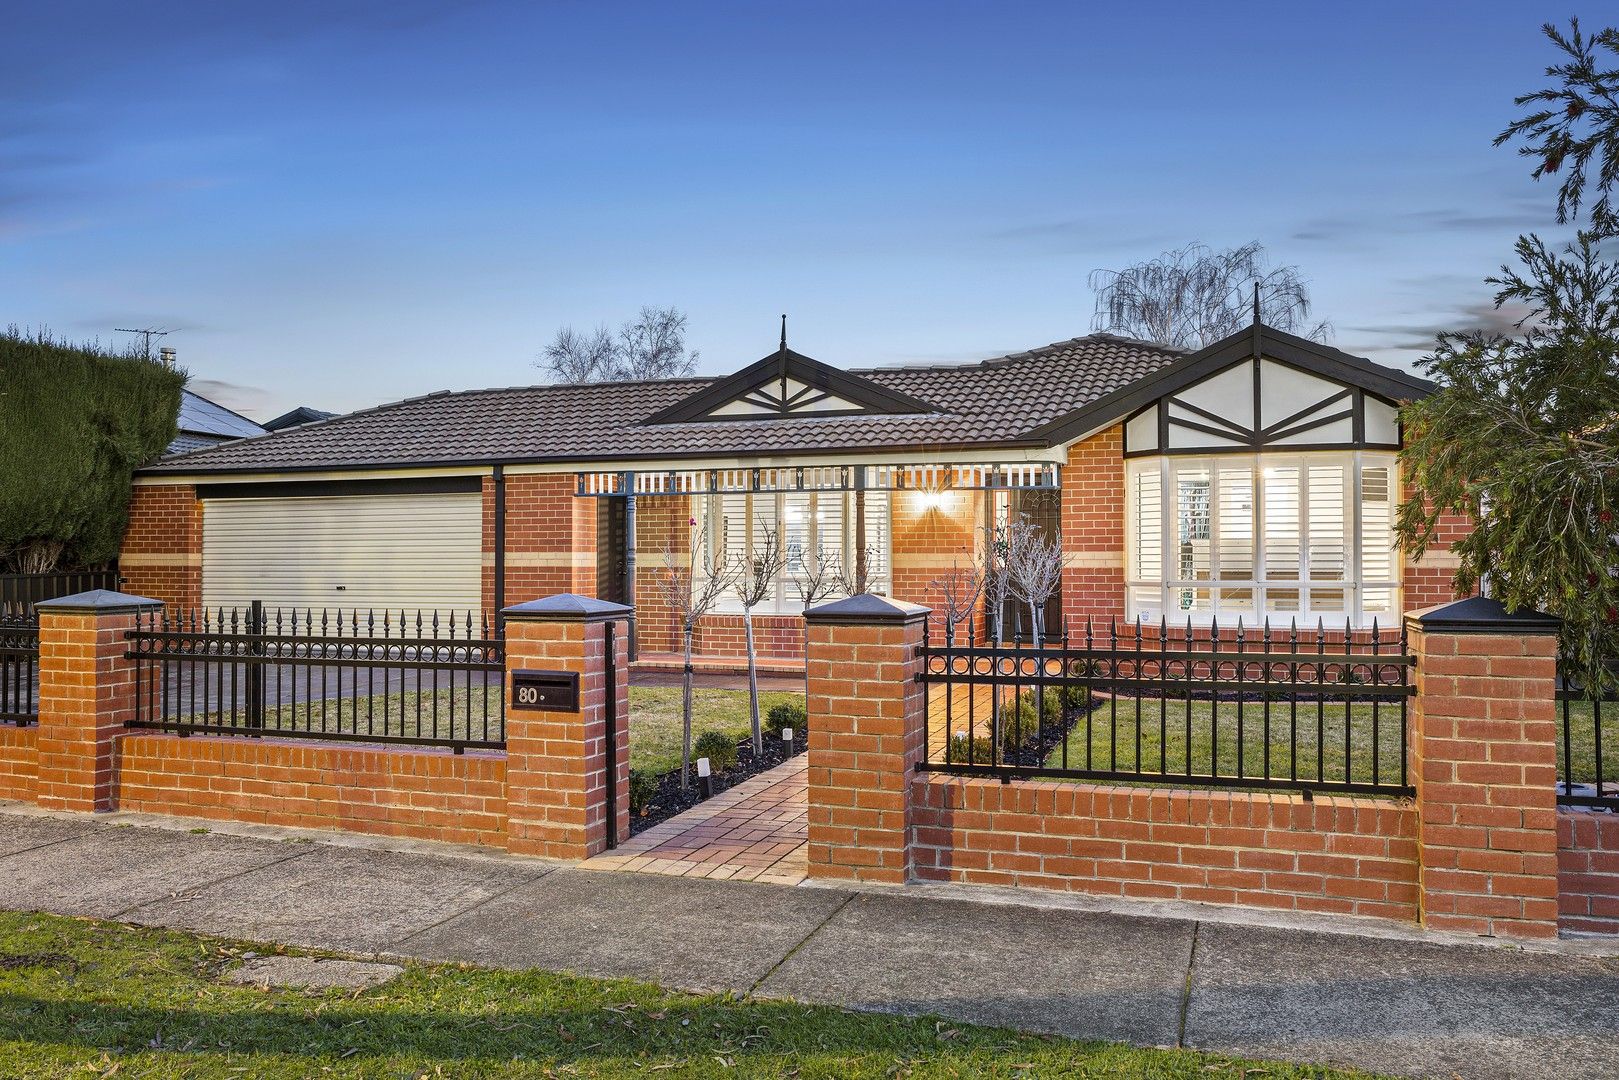 4 bedrooms House in 80 Buckingham Drive ROWVILLE VIC, 3178